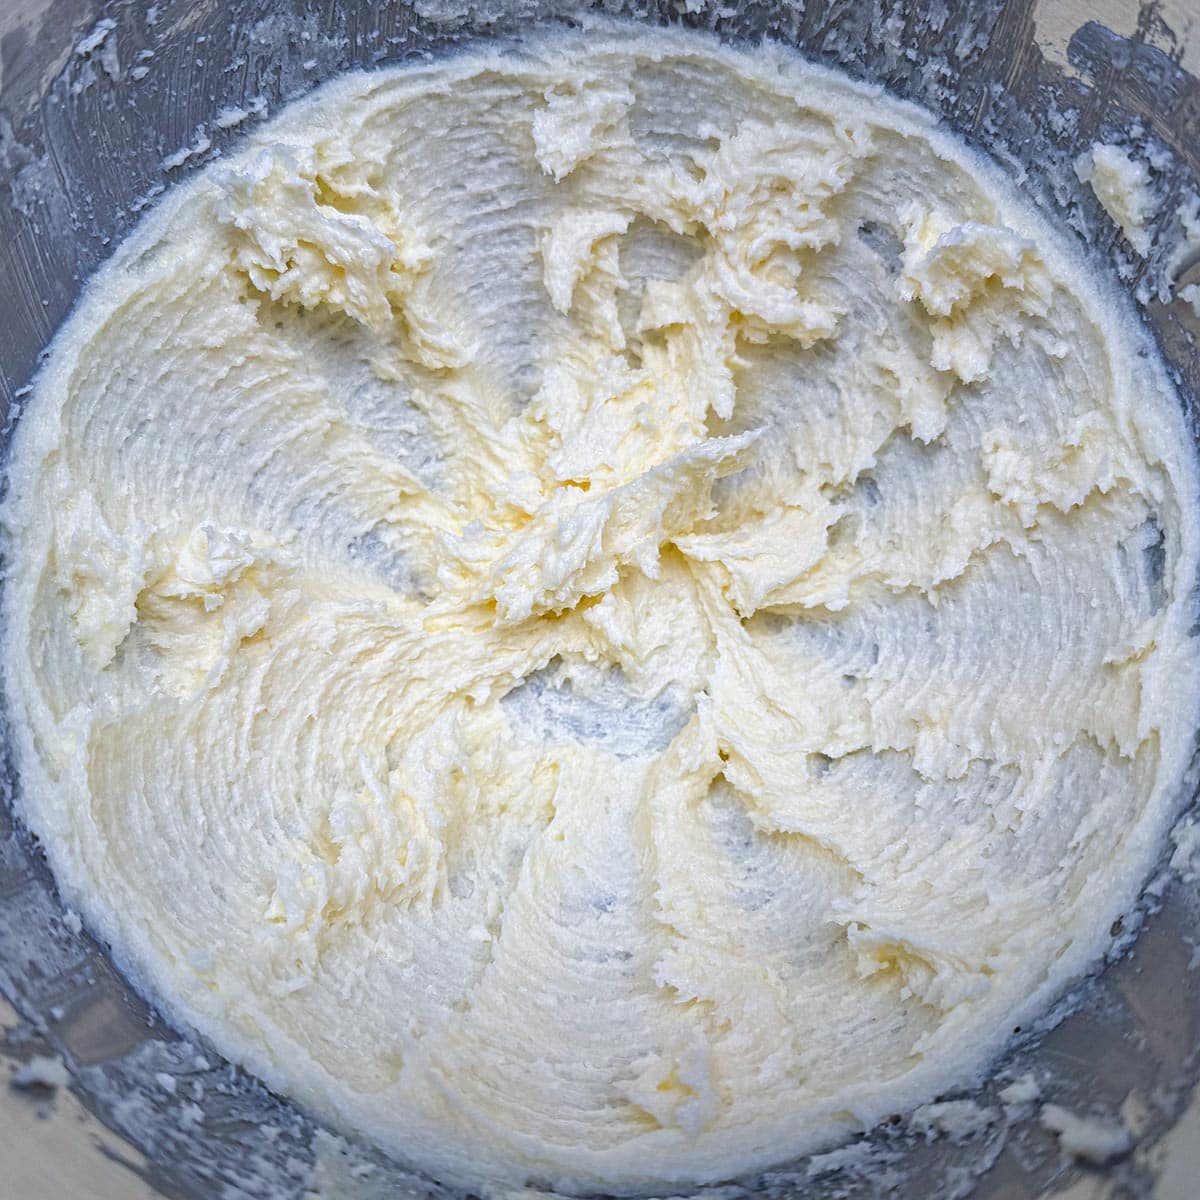 Sugar and butter after being mixed for 3 minutes.